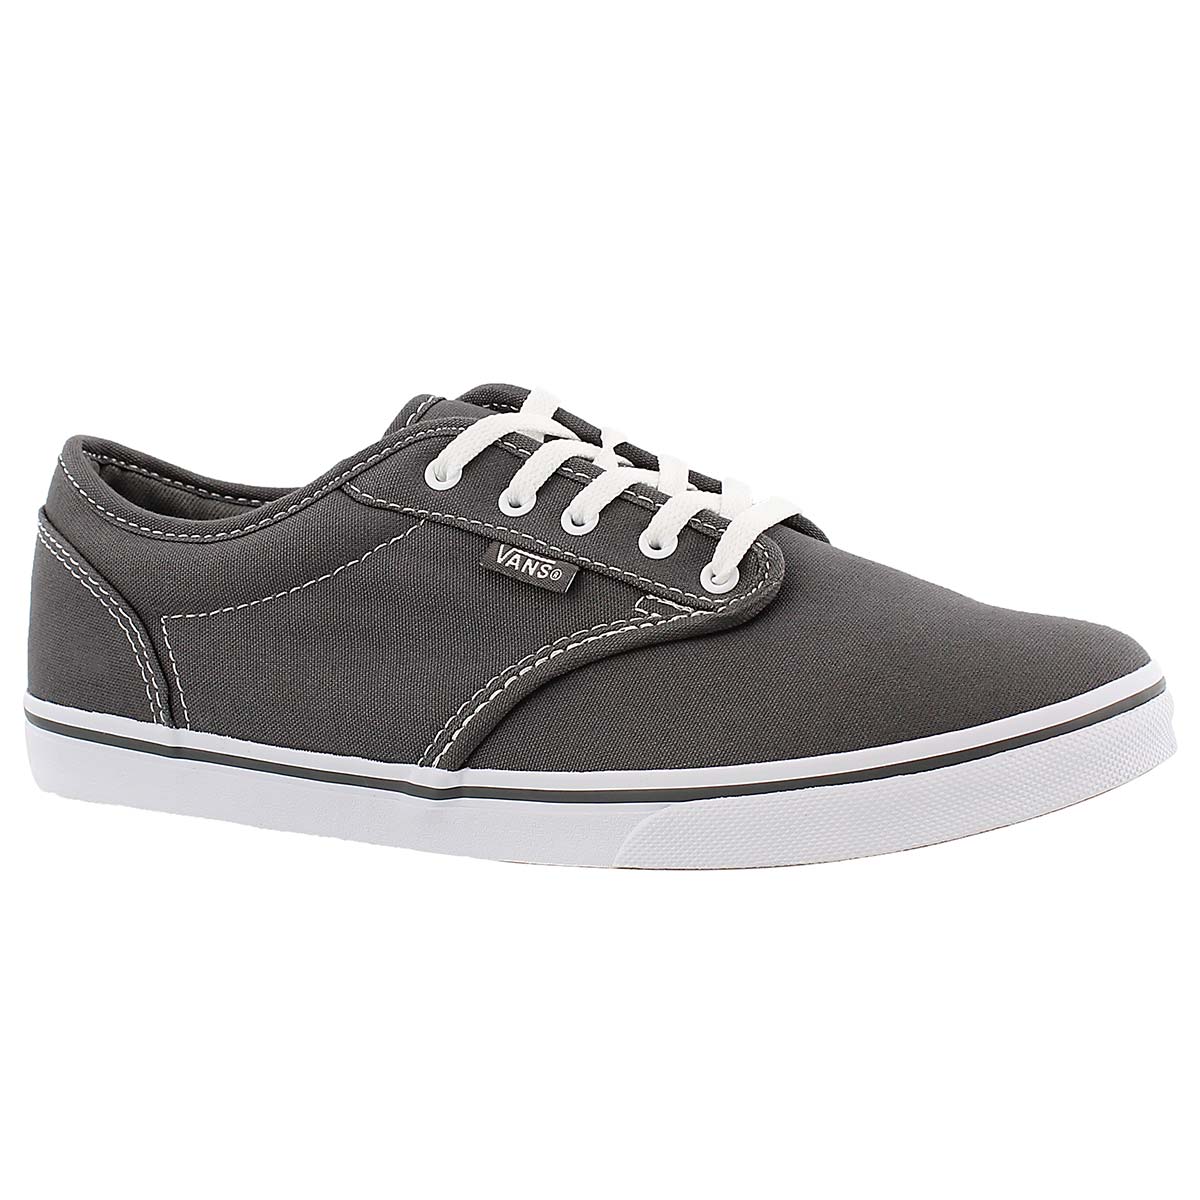 Vans Women's ATWOOD LOW pewter lace up 